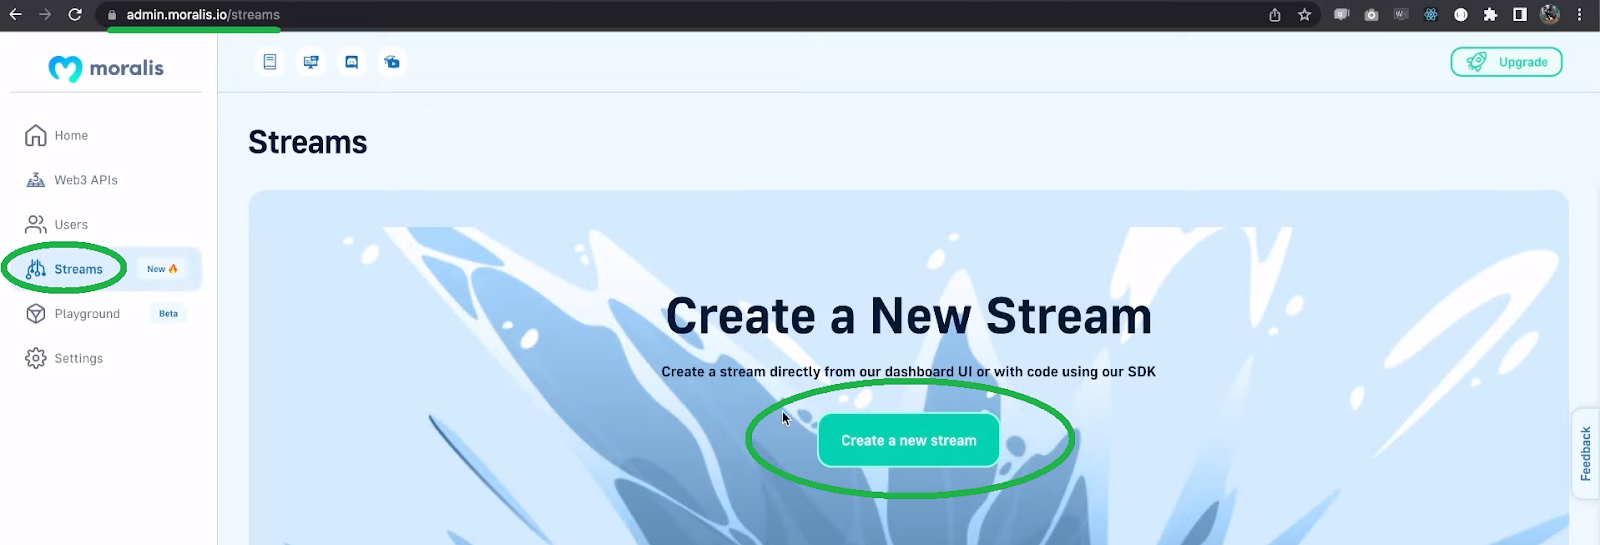 create a new stream landing page on moralis